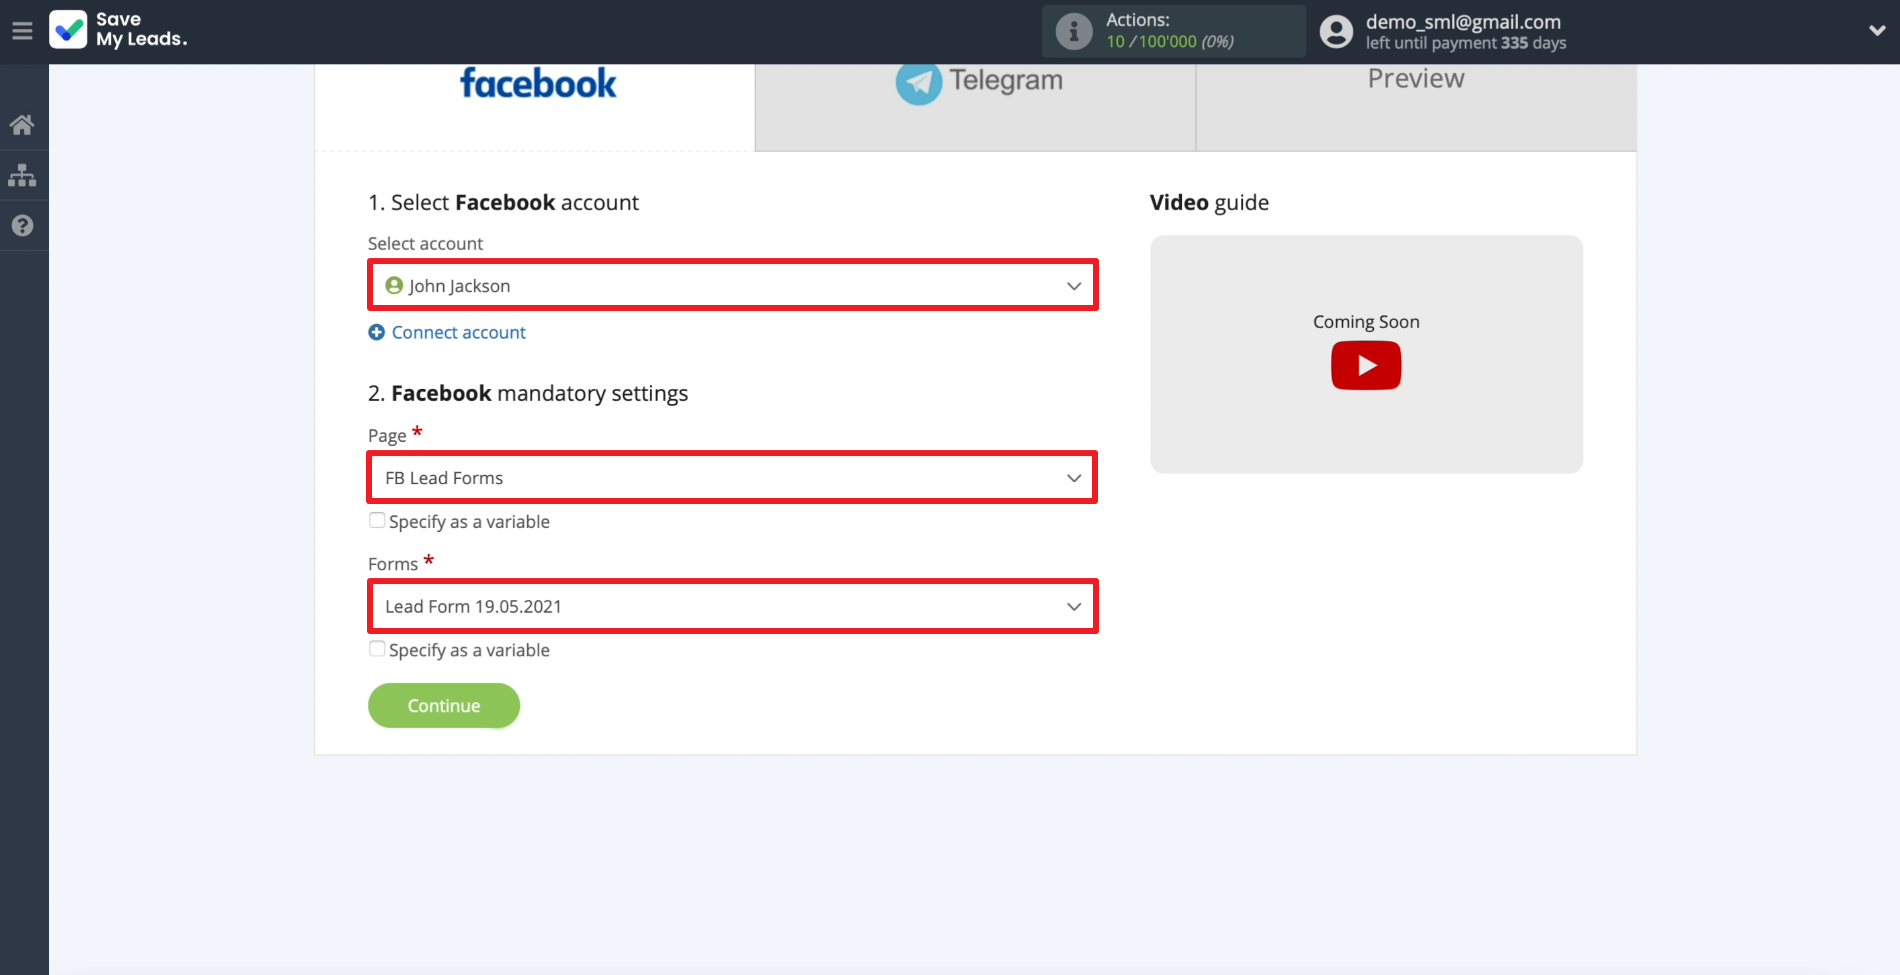 How to set up the upload of new leads from a Facebook advertising account in Telegram | We connect the form